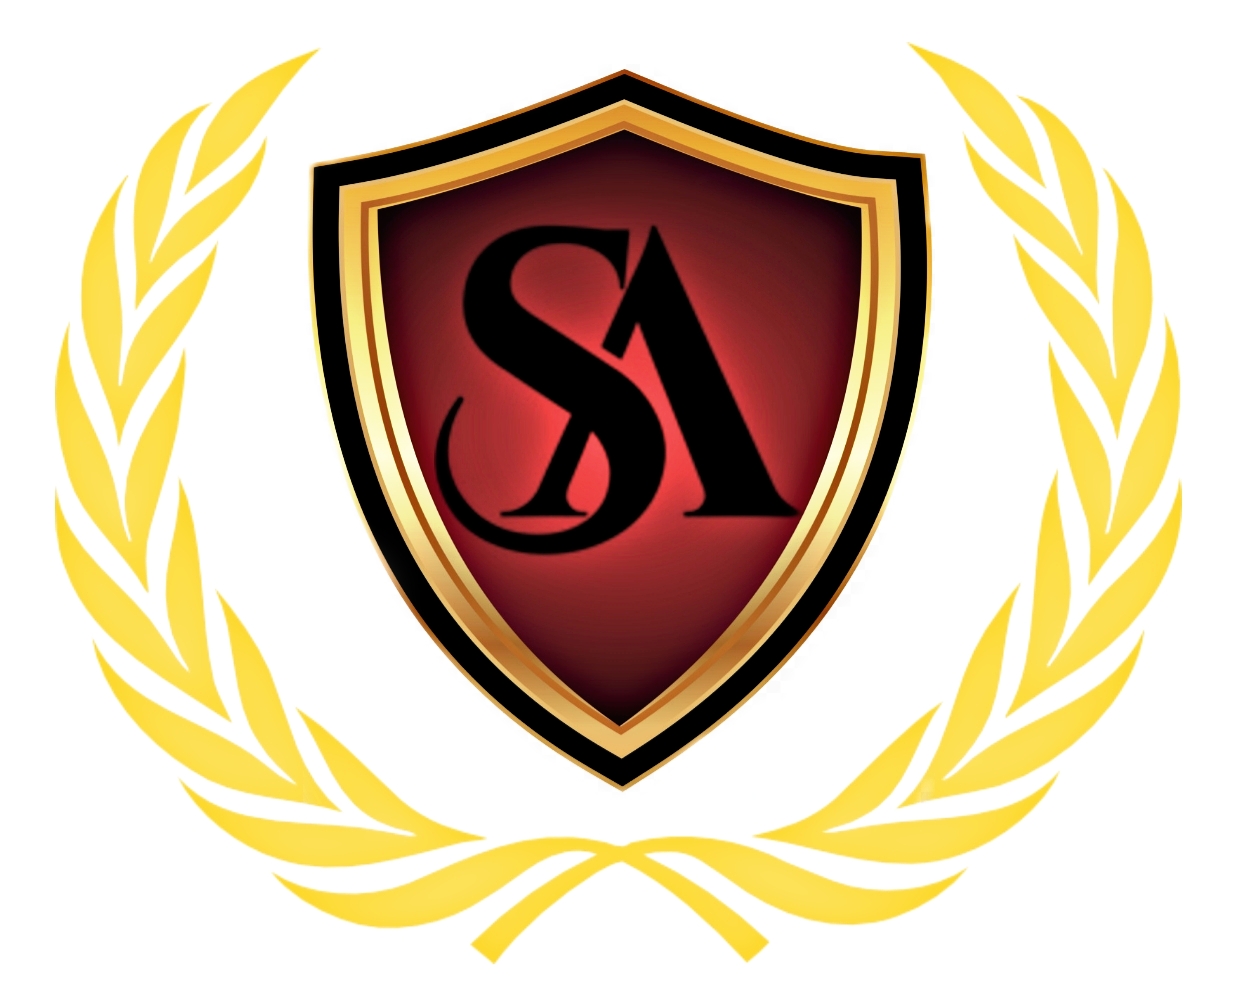 SEVENTHAVENUE SECURITY AND MANPOWER PVT. LTD.